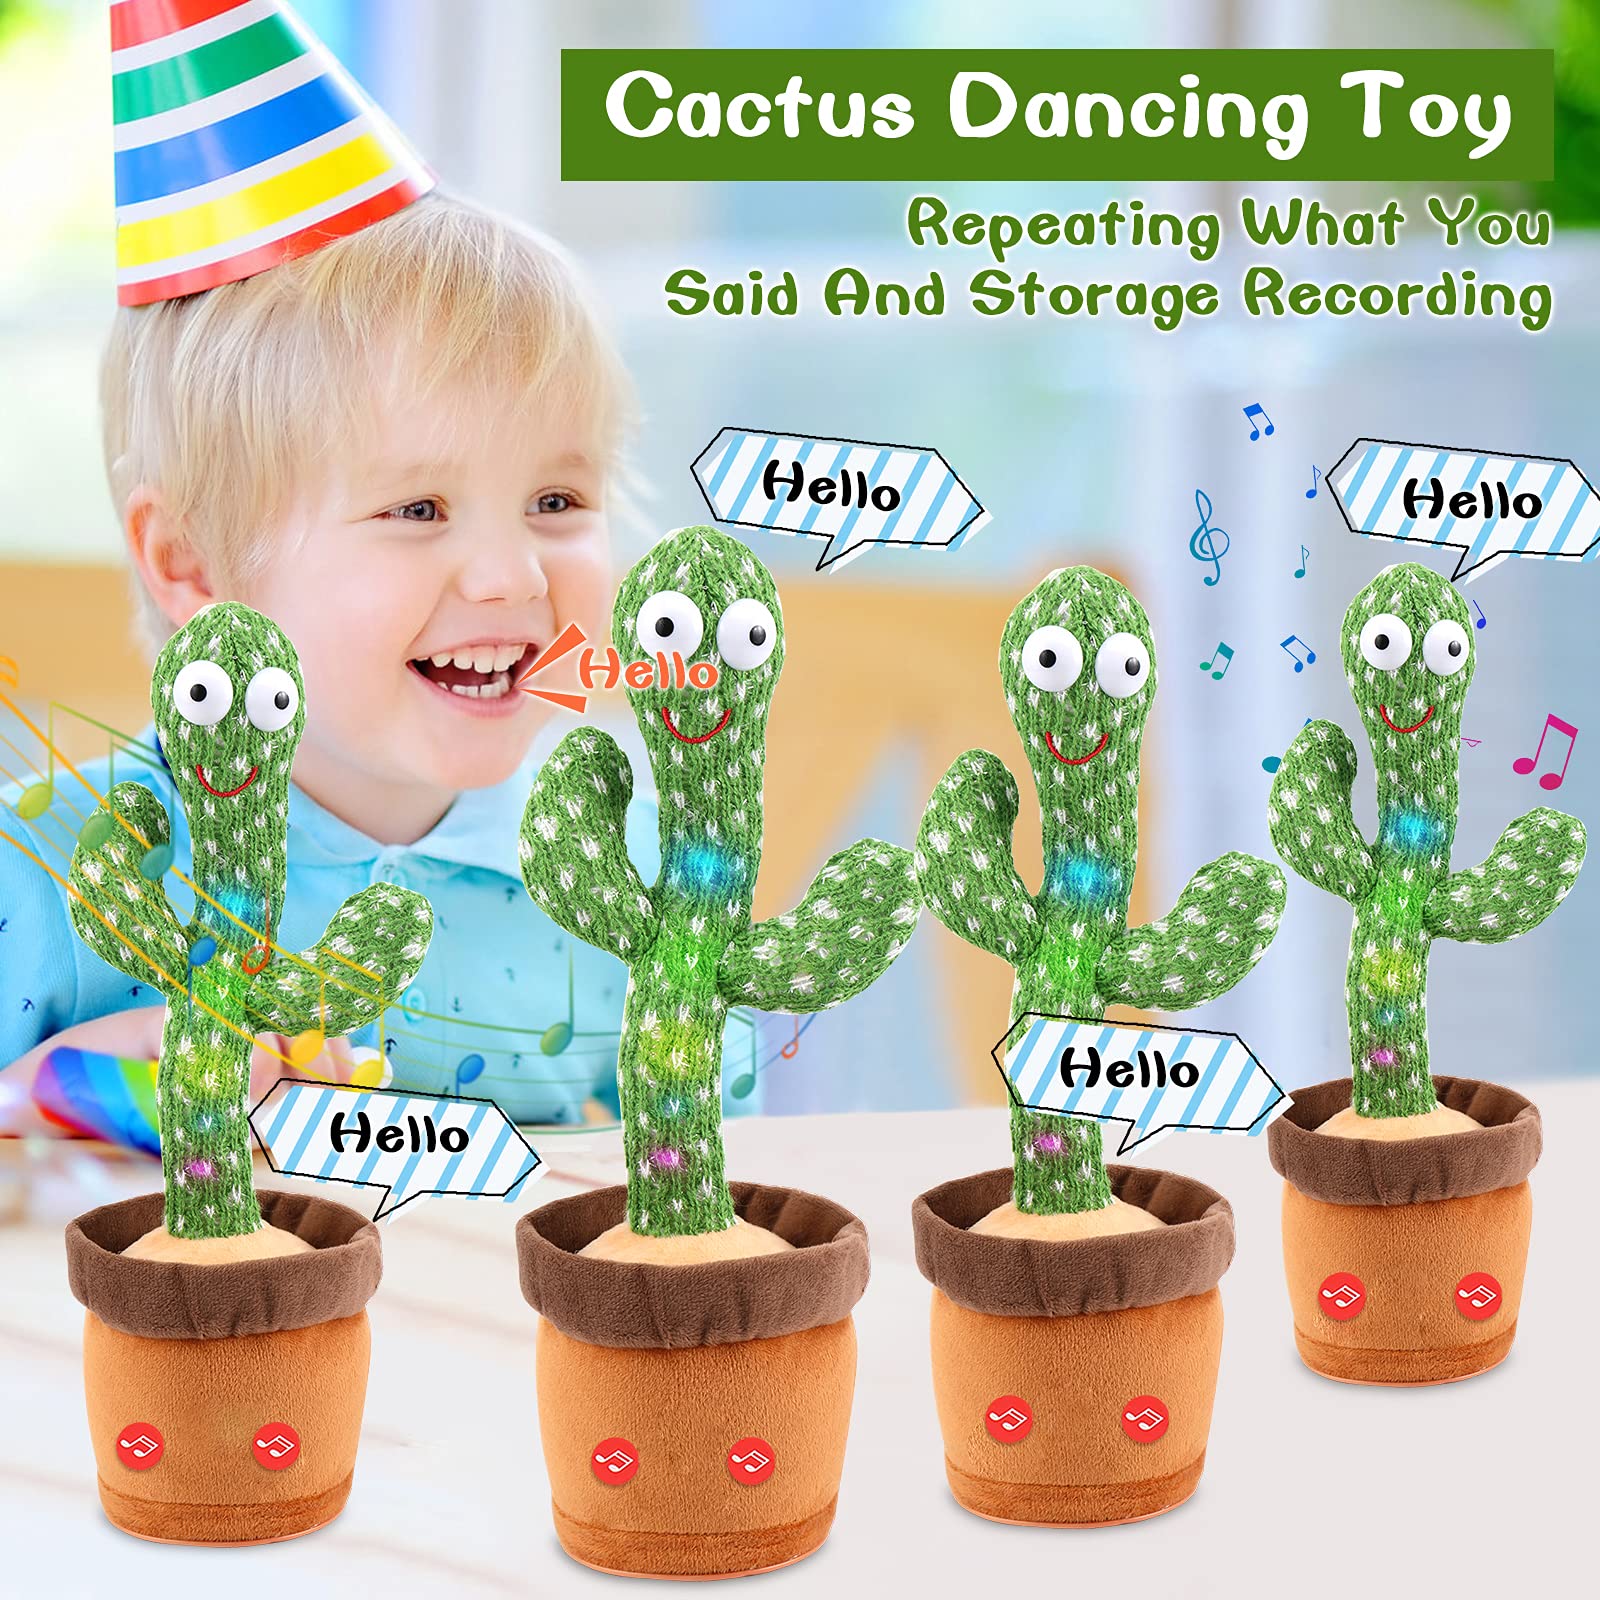 Emoin Dancing Cactus,Talking Cactus Toy,Sunny The Cactus Repeats What You Say,Electronic Dancing Cactus Toy with Lighting,Singing Cactus Recording and Repeat Your Words,Cactus Mimicking Toy for Kids